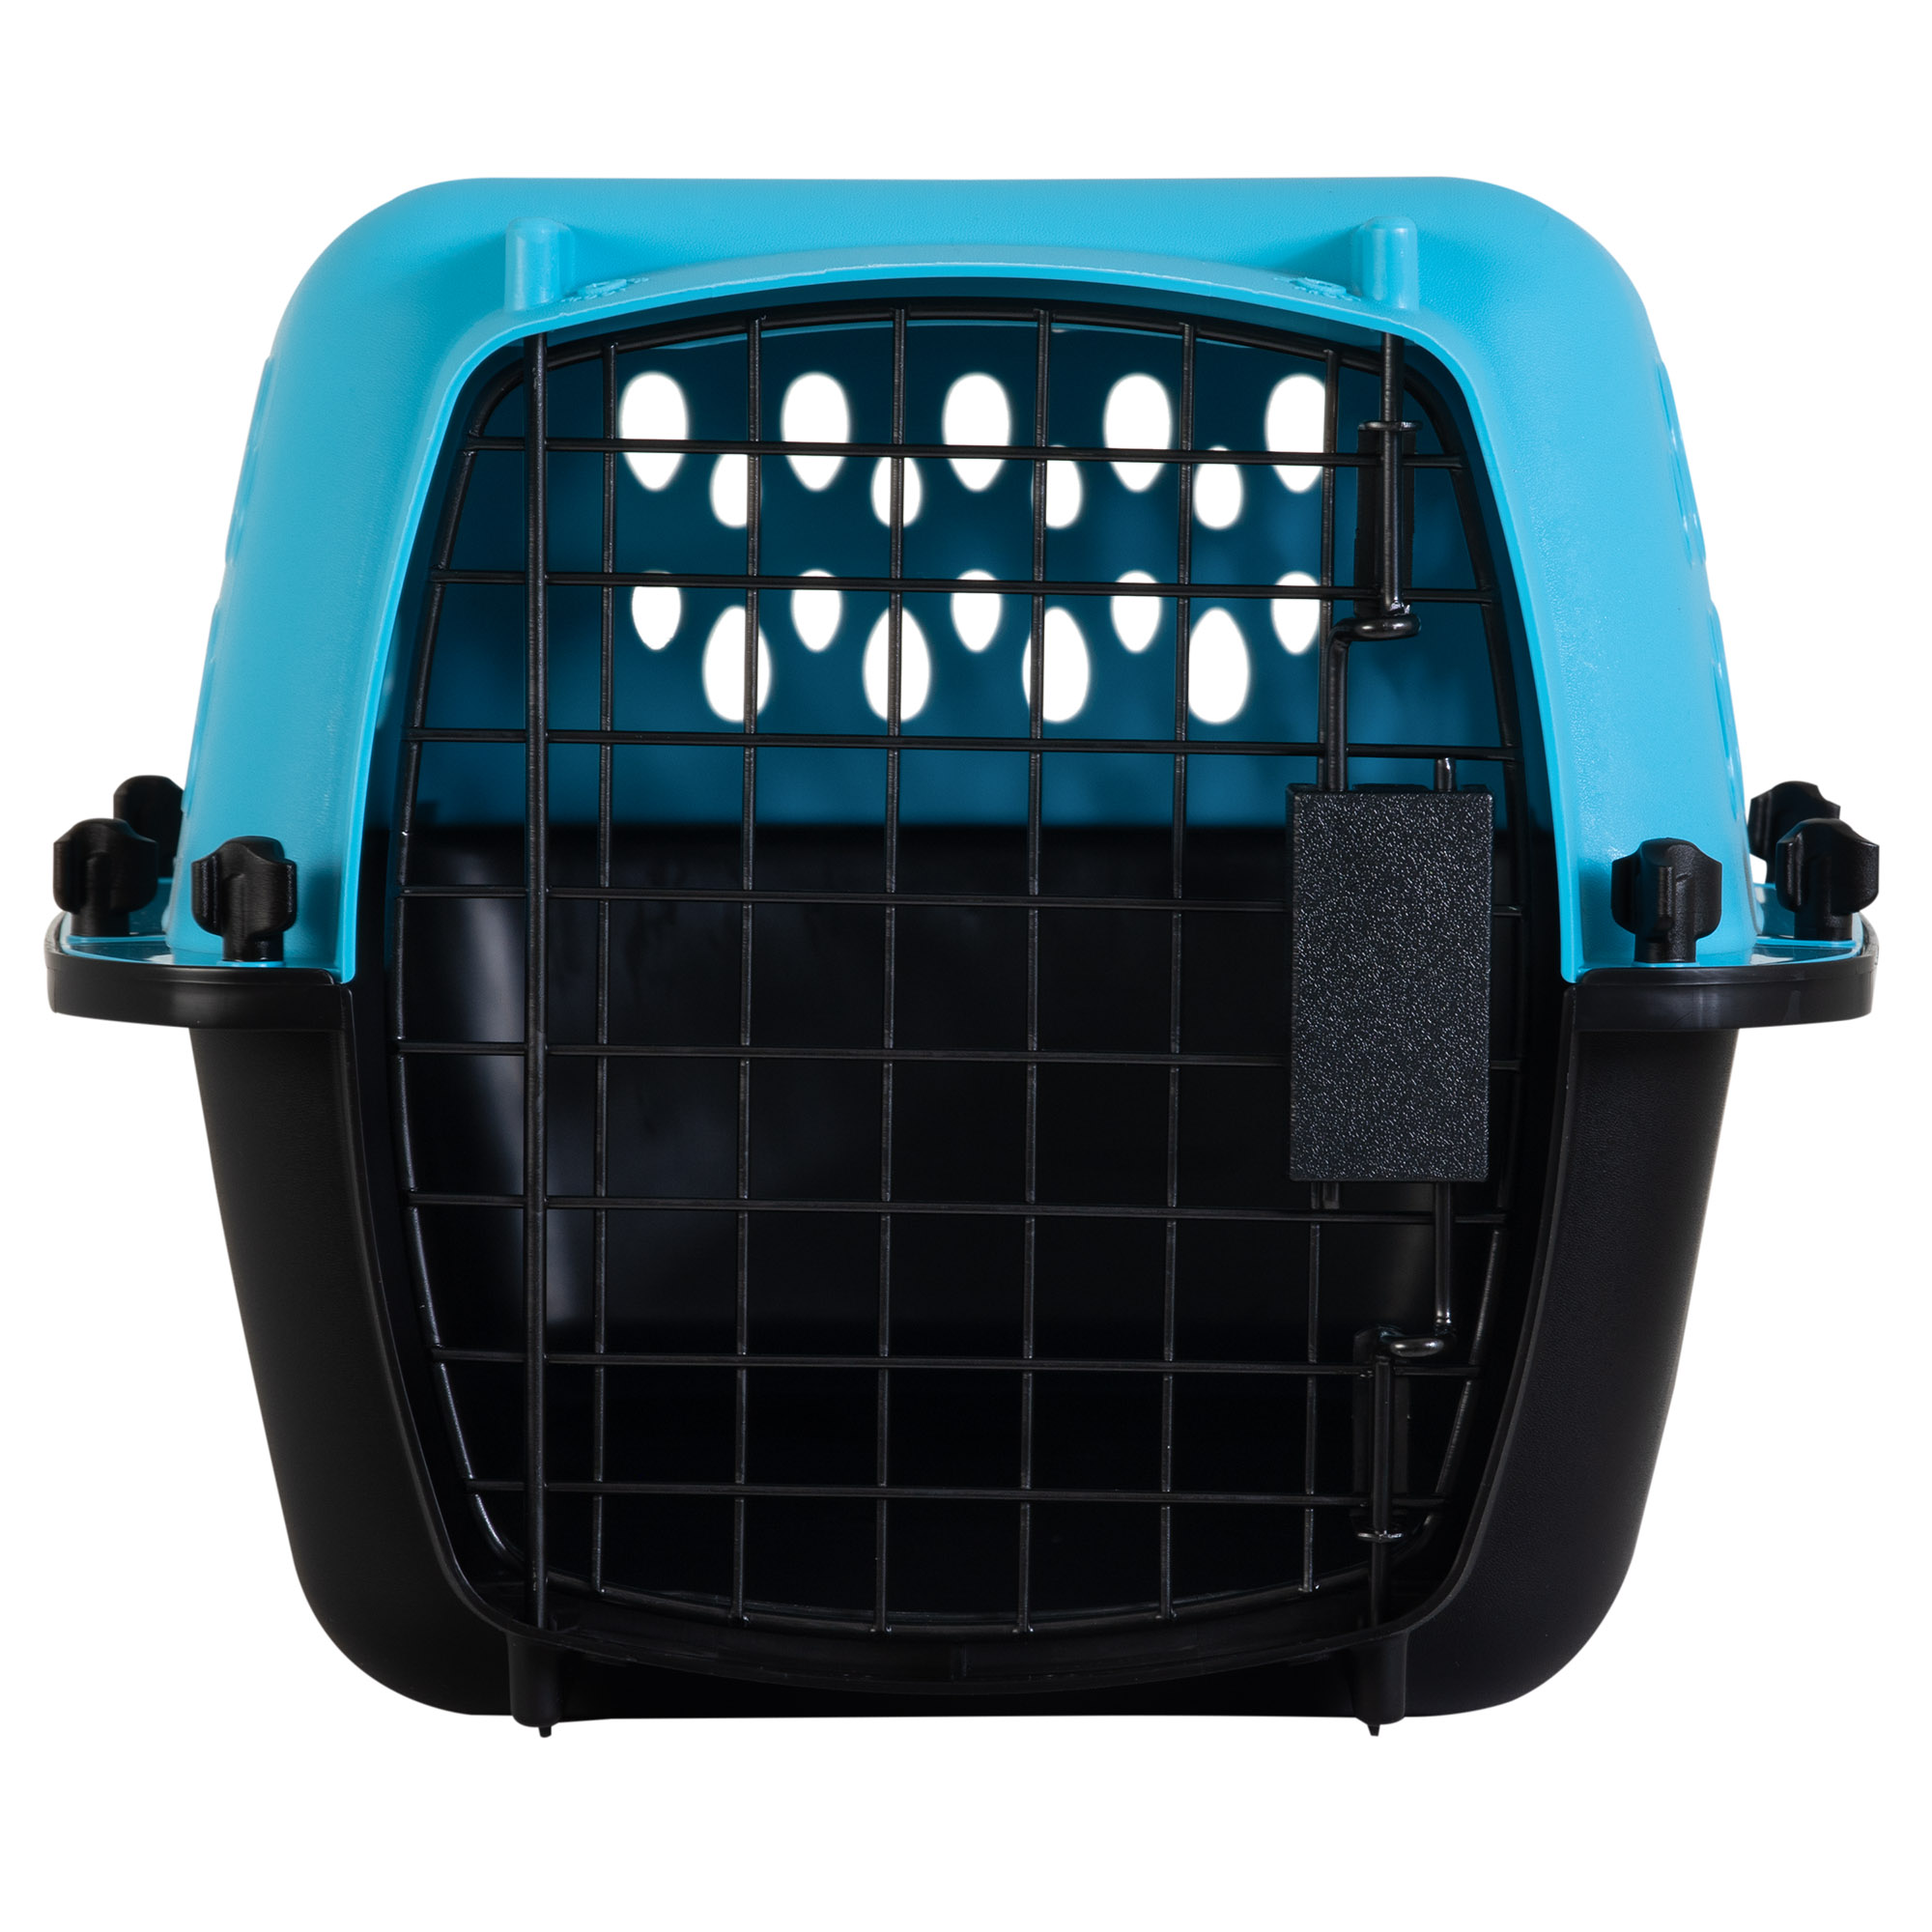 Petmate Pet Porter 19" Travel Fashion Dog Kennel Portable Small Pet Carrier for Dogs Upto 10 lb, Blue - image 5 of 8